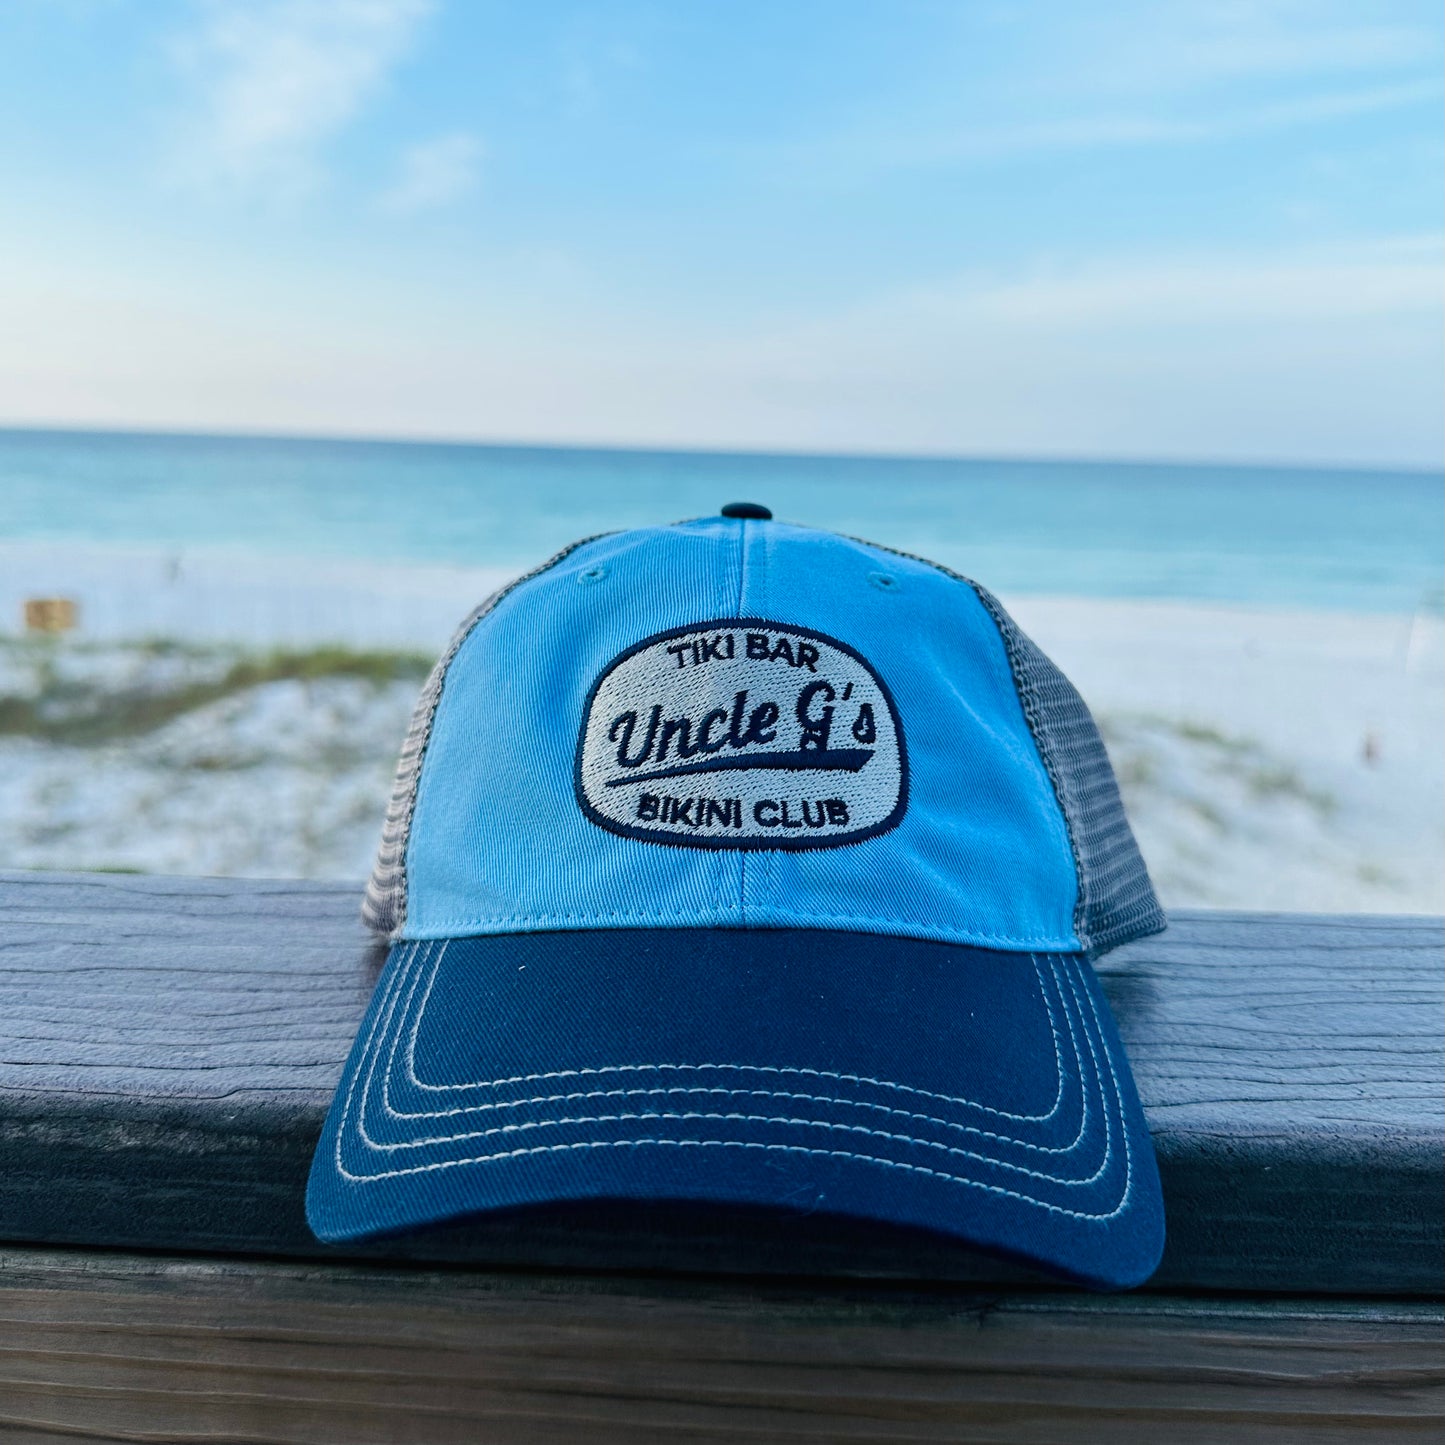 Uncle G's Original Stitched Logo Trucker Hat - Columbia Blue/Charcoal/Navy